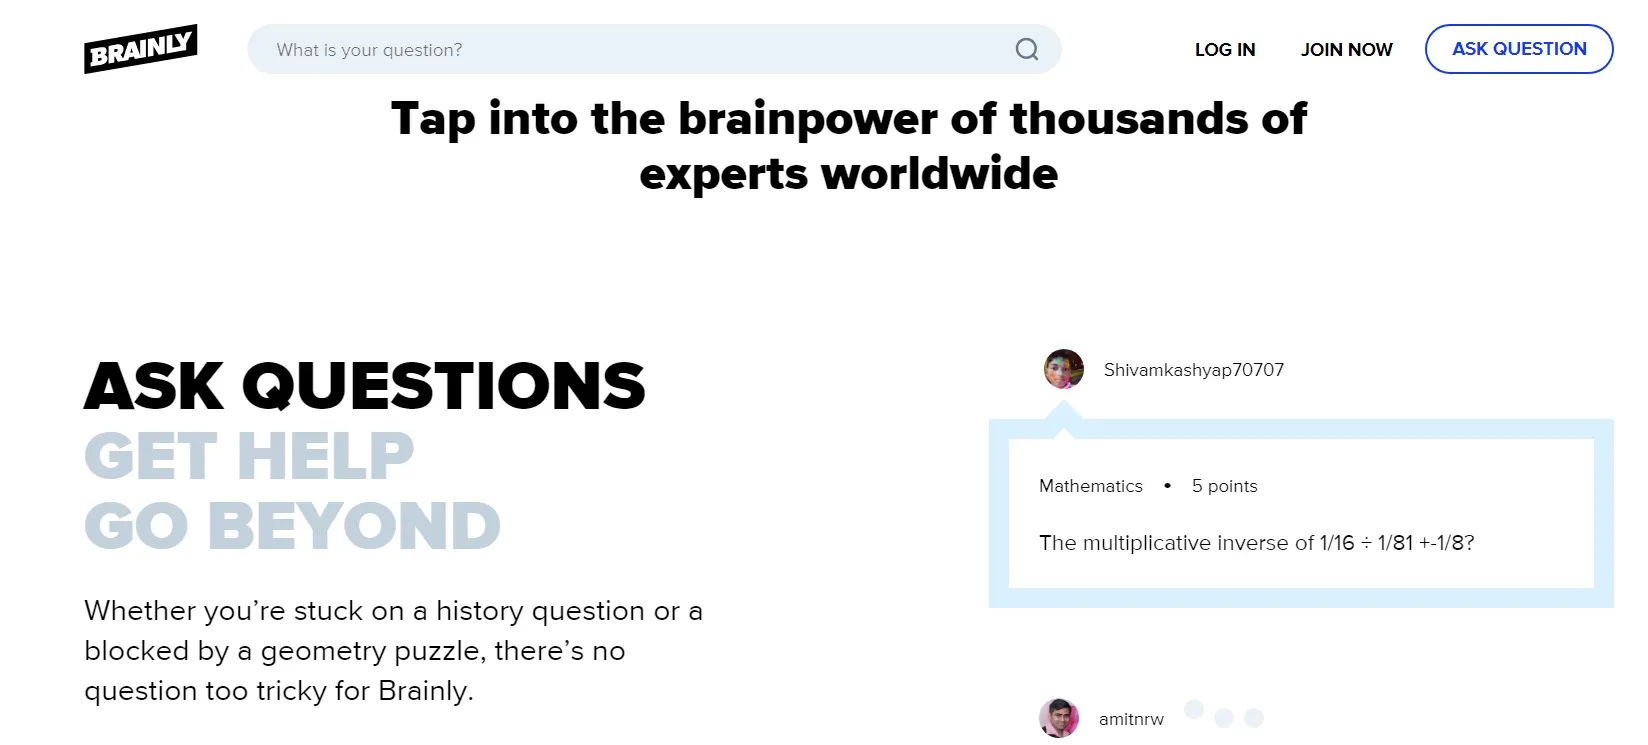 Brainly features